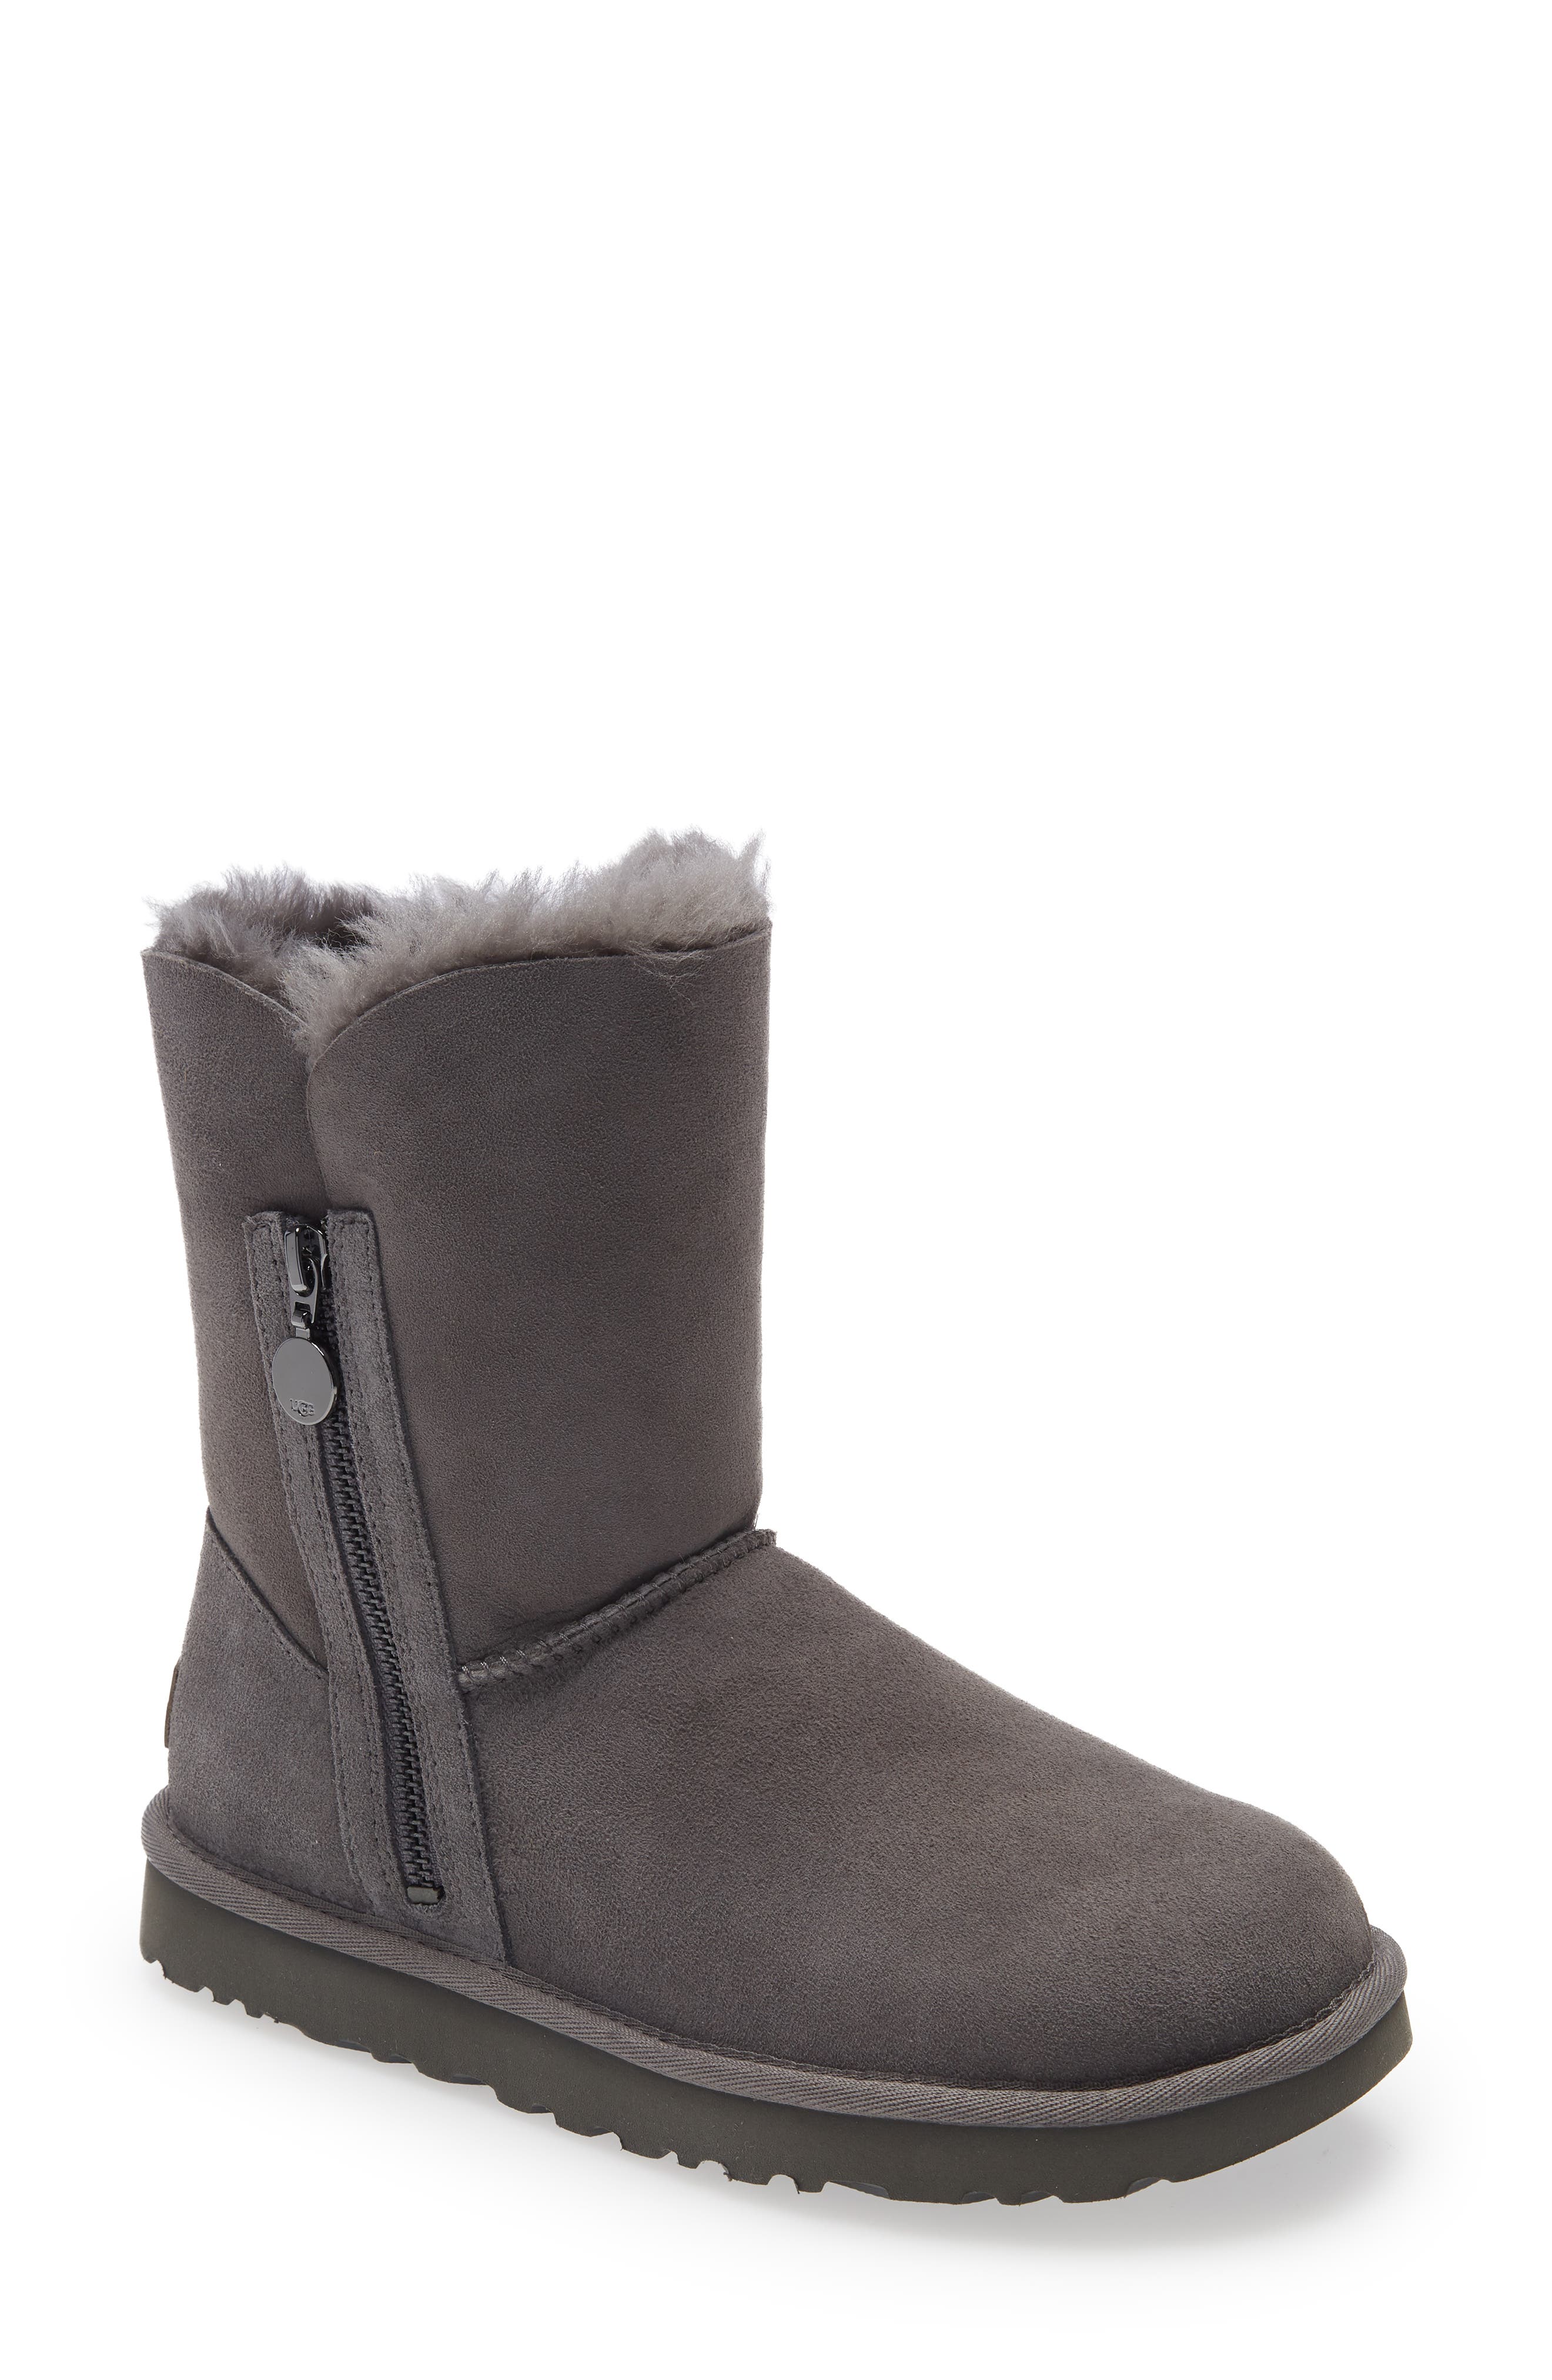 nordstrom shoes uggs sale